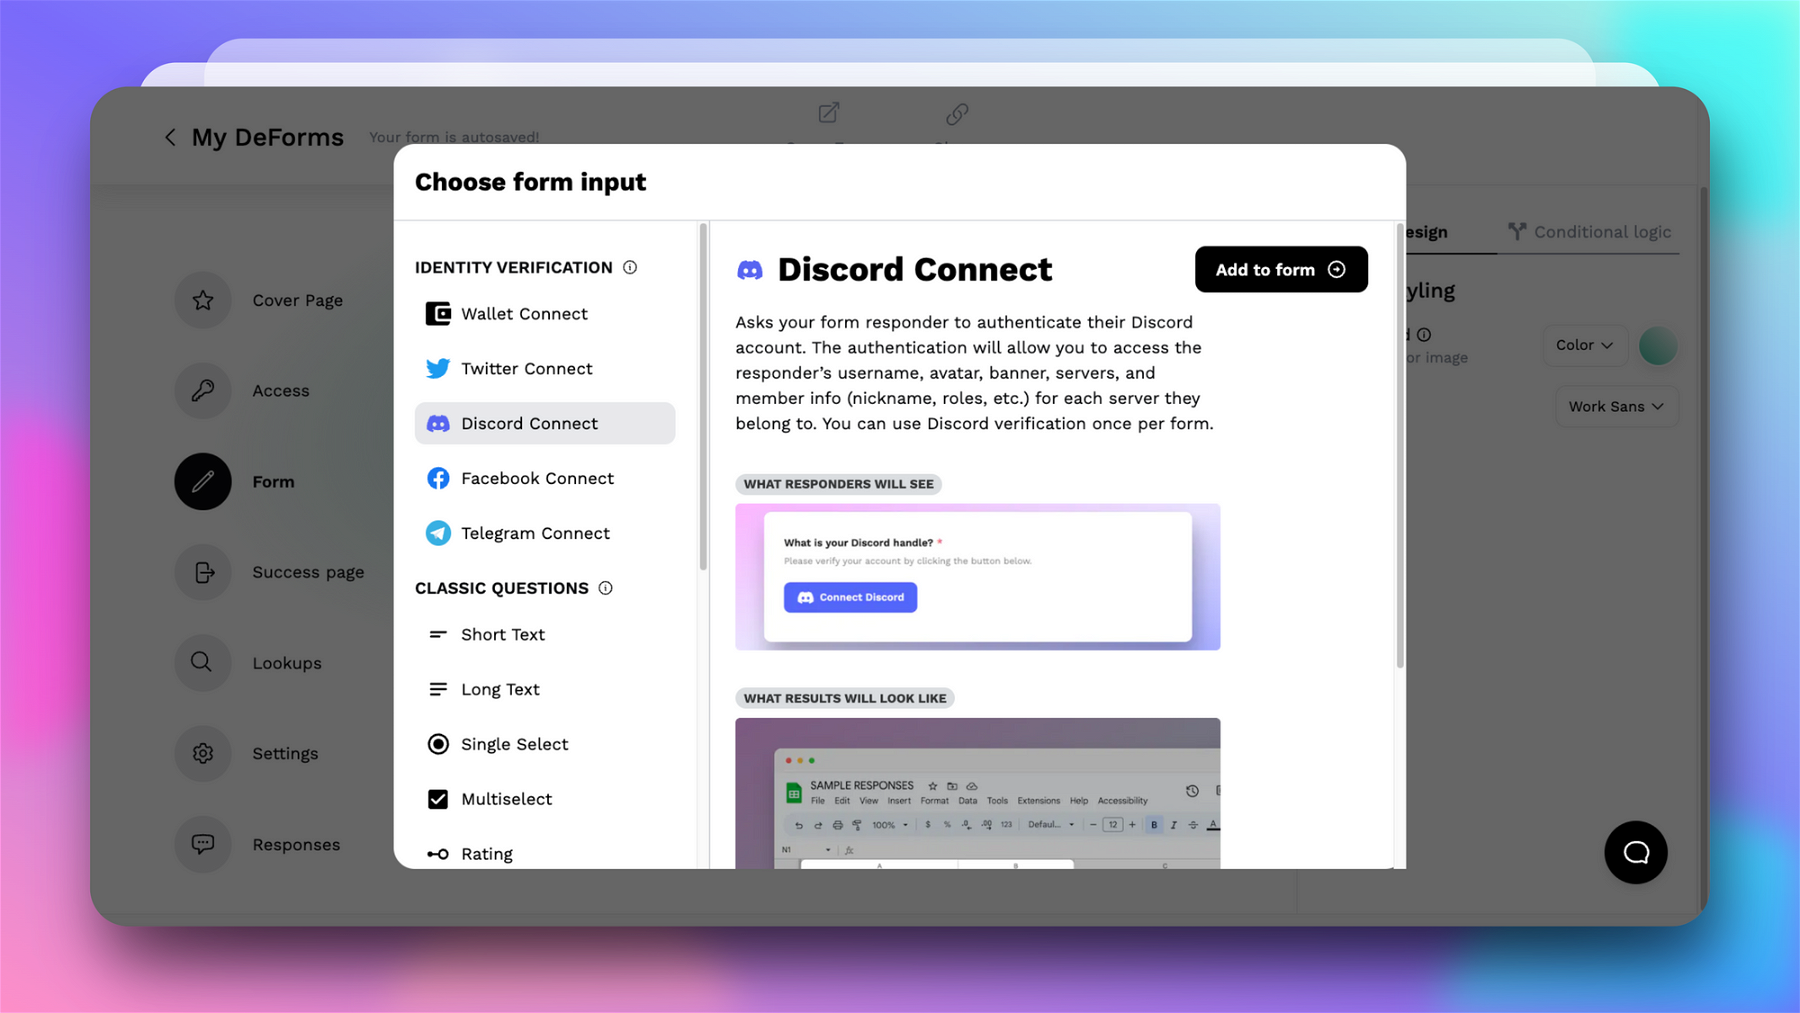 With the Discord Connect option enabled on your form, responders will be able to authenticate their Discord accounts. This will allow you to see useful information like their username, avatar, banner, servers, and member info.